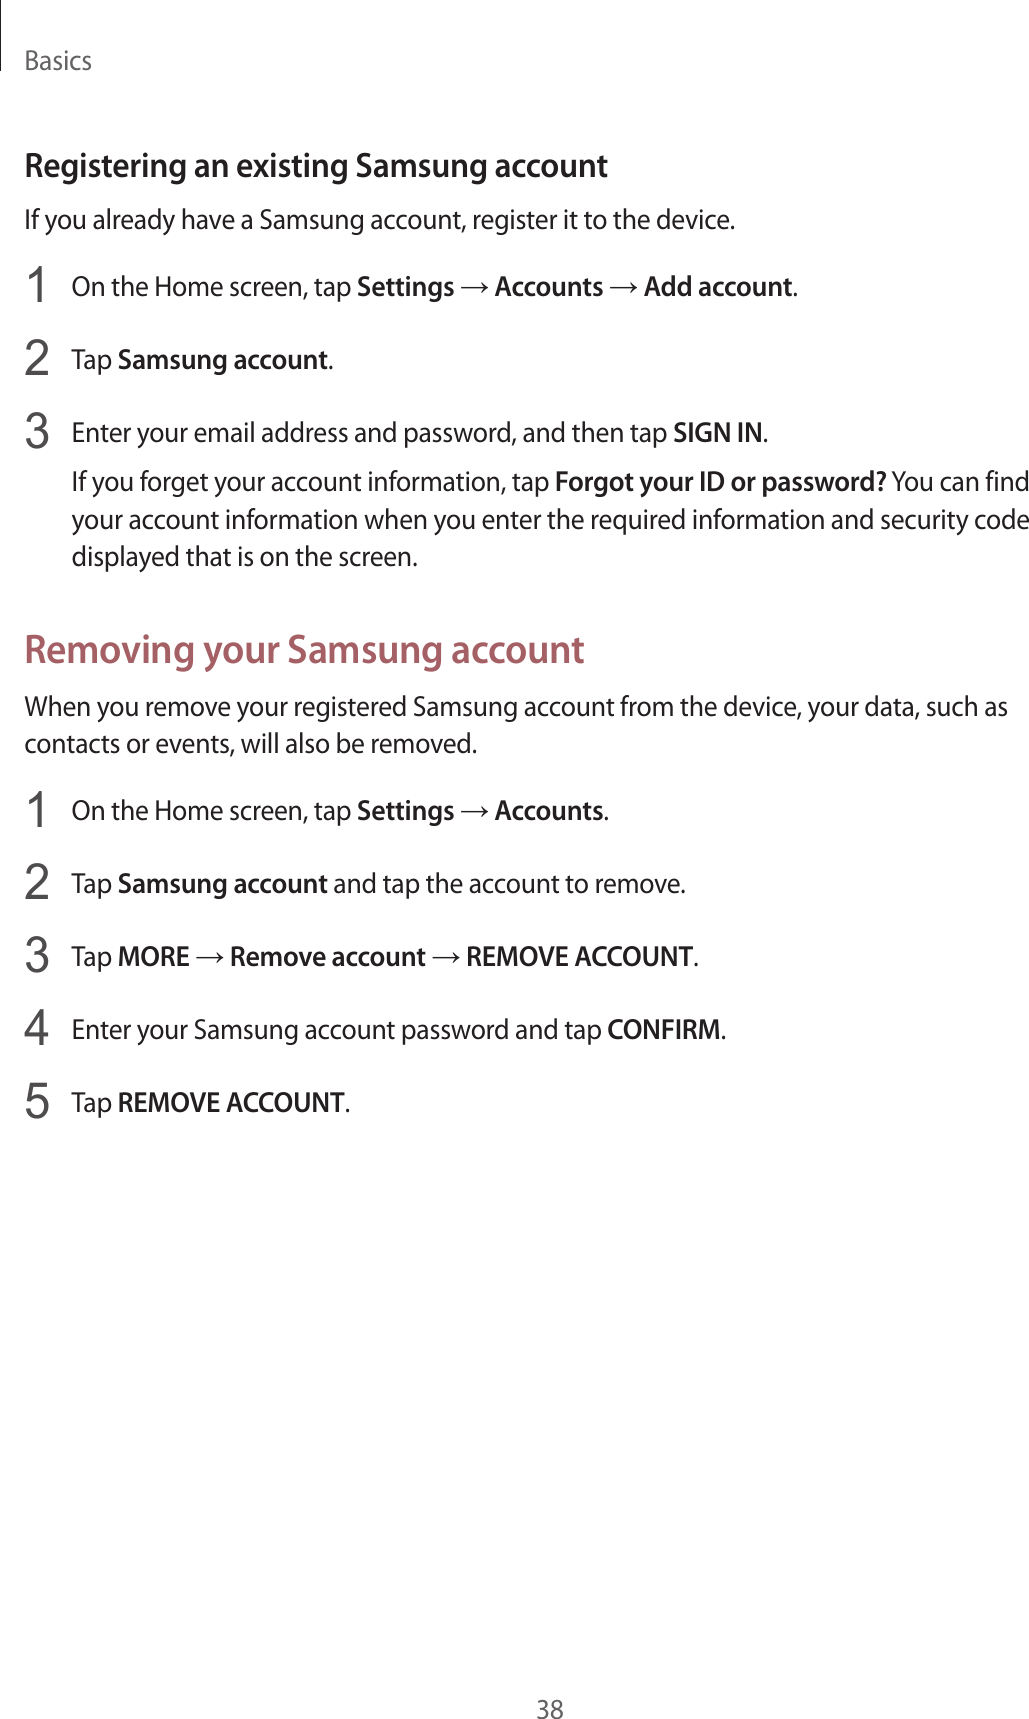 Basics38Registering an existing Samsung accountIf you already have a Samsung account, register it to the device.1  On the Home screen, tap Settings → Accounts → Add account.2  Tap Samsung account.3  Enter your email address and password, and then tap SIGN IN.If you forget your account information, tap Forgot your ID or password? You can find your account information when you enter the required information and security code displayed that is on the screen.Removing your Samsung accountWhen you remove your registered Samsung account from the device, your data, such as contacts or events, will also be removed.1  On the Home screen, tap Settings → Accounts.2  Tap Samsung account and tap the account to remove.3  Tap MORE → Remove account → REMOVE ACCOUNT.4  Enter your Samsung account password and tap CONFIRM.5  Tap REMOVE ACCOUNT.